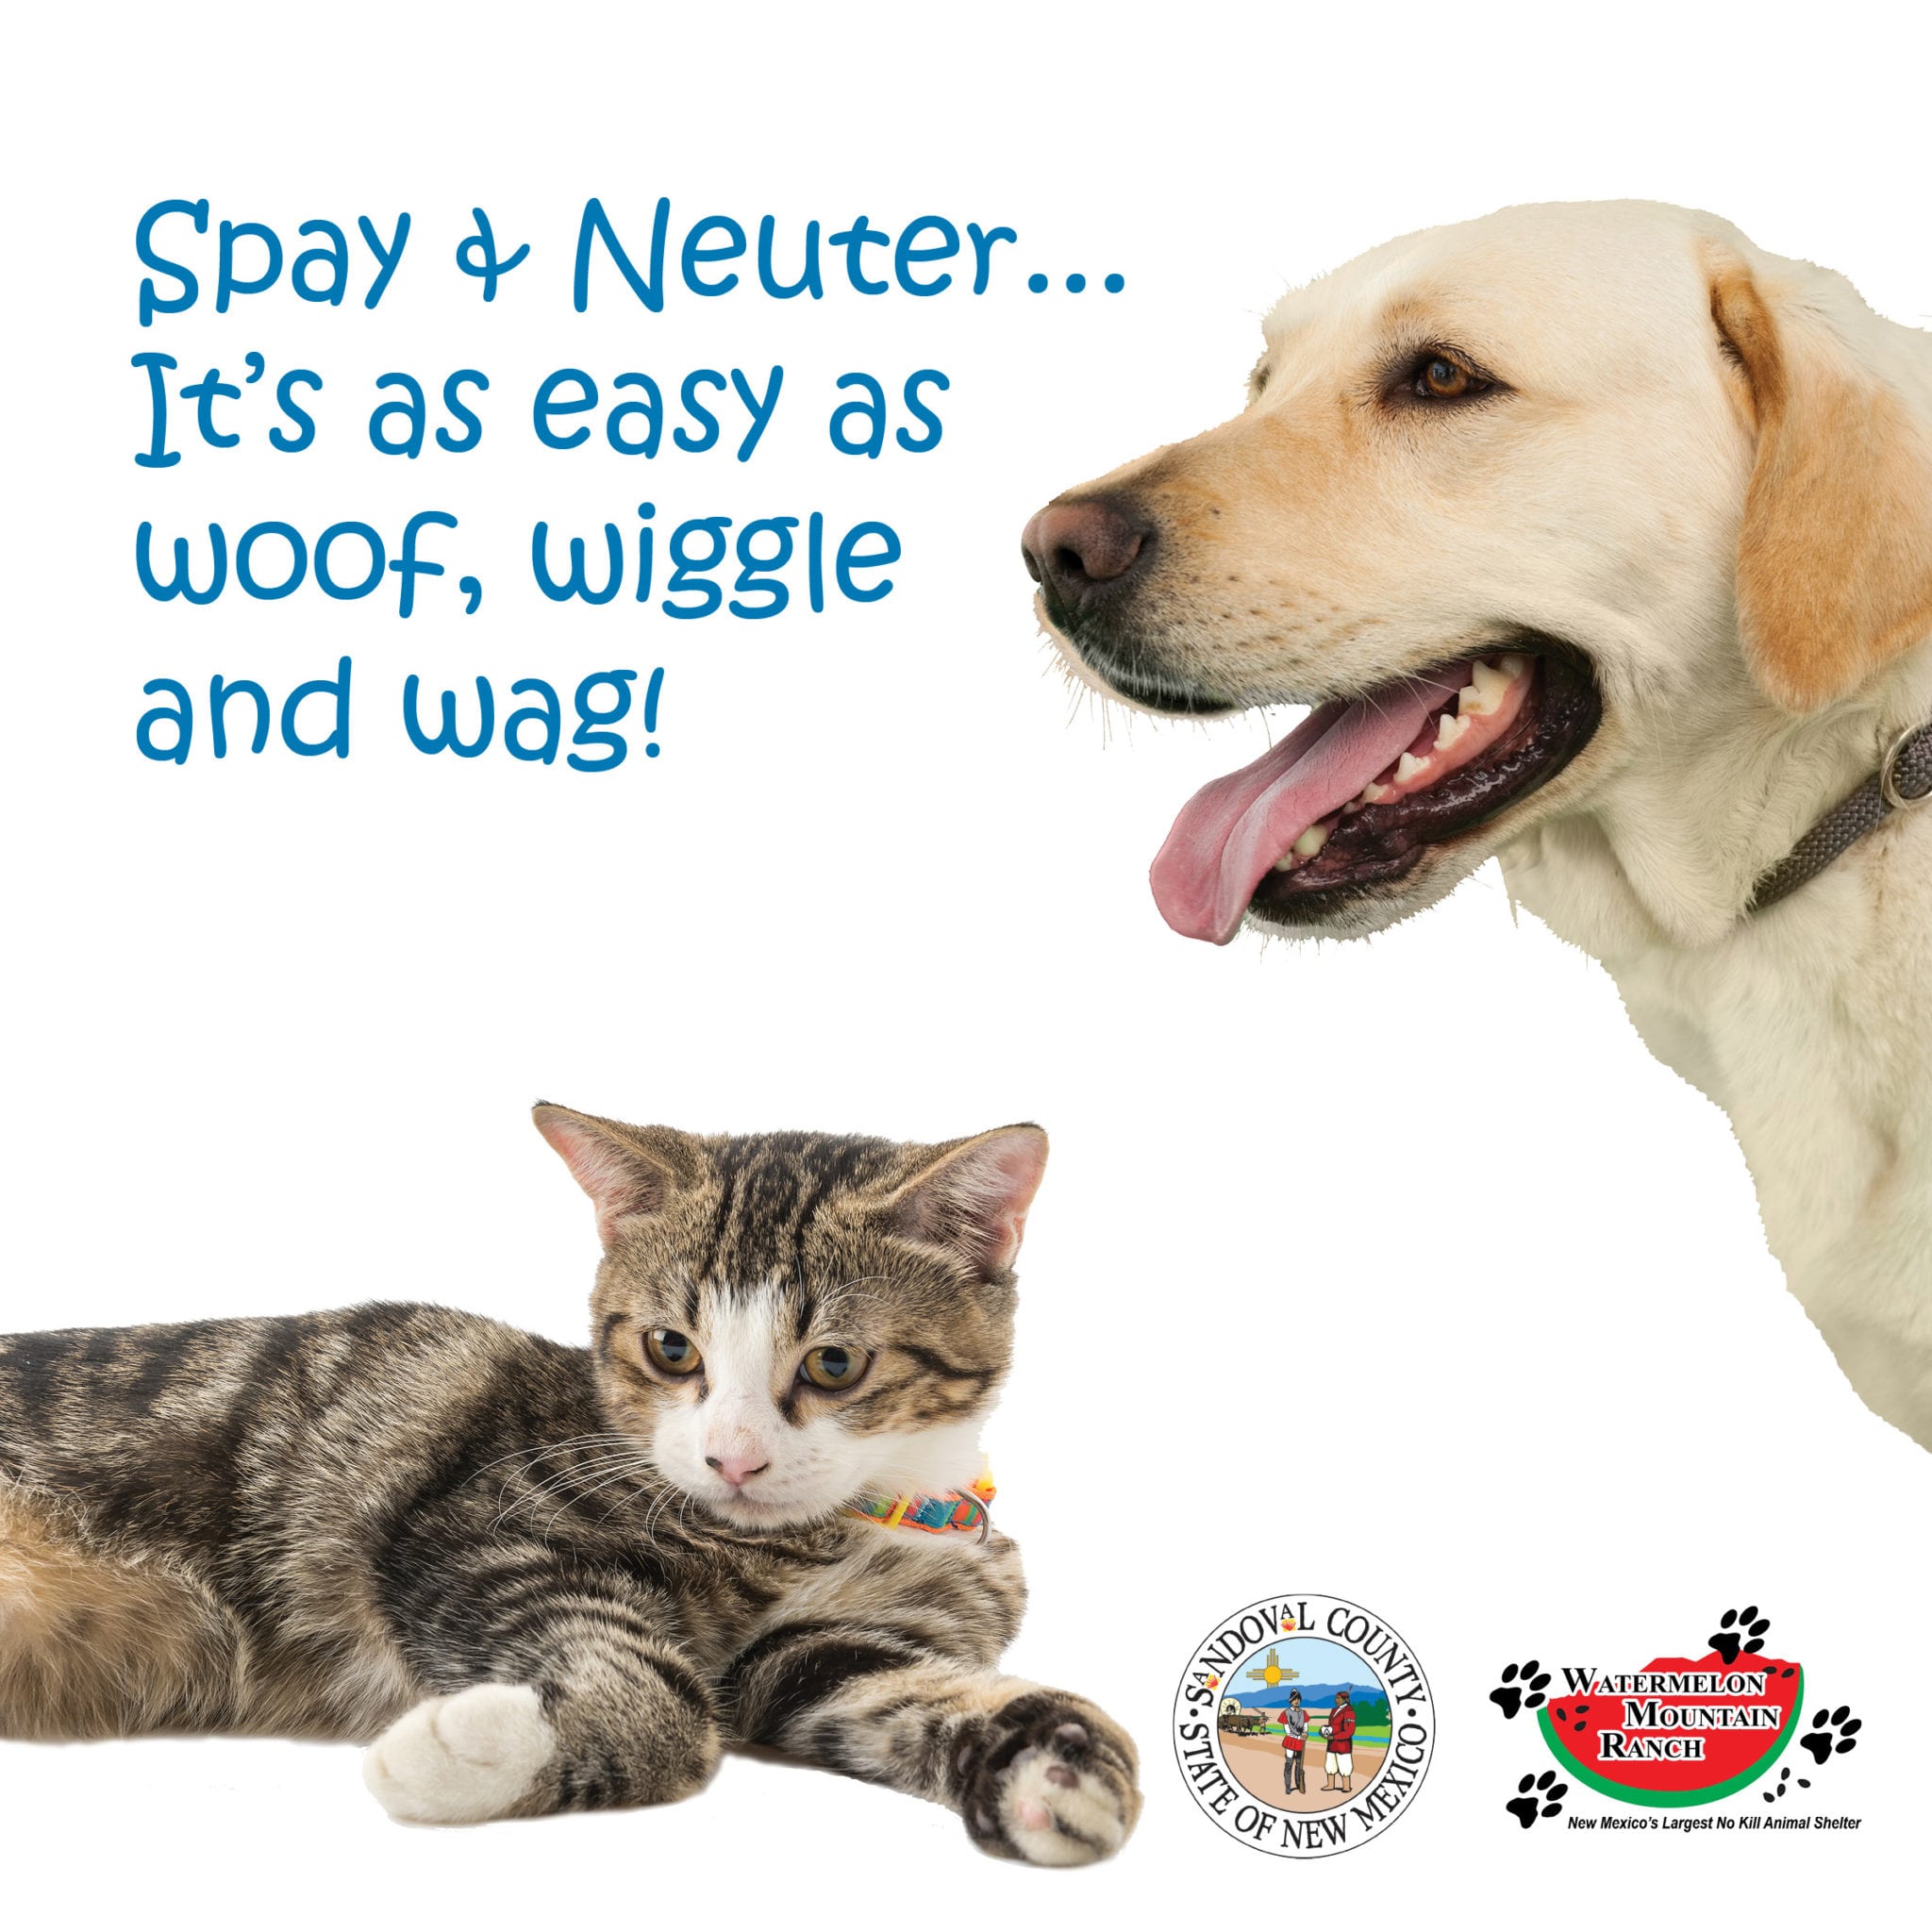 County Offers Low-Income Spay/Neuter 